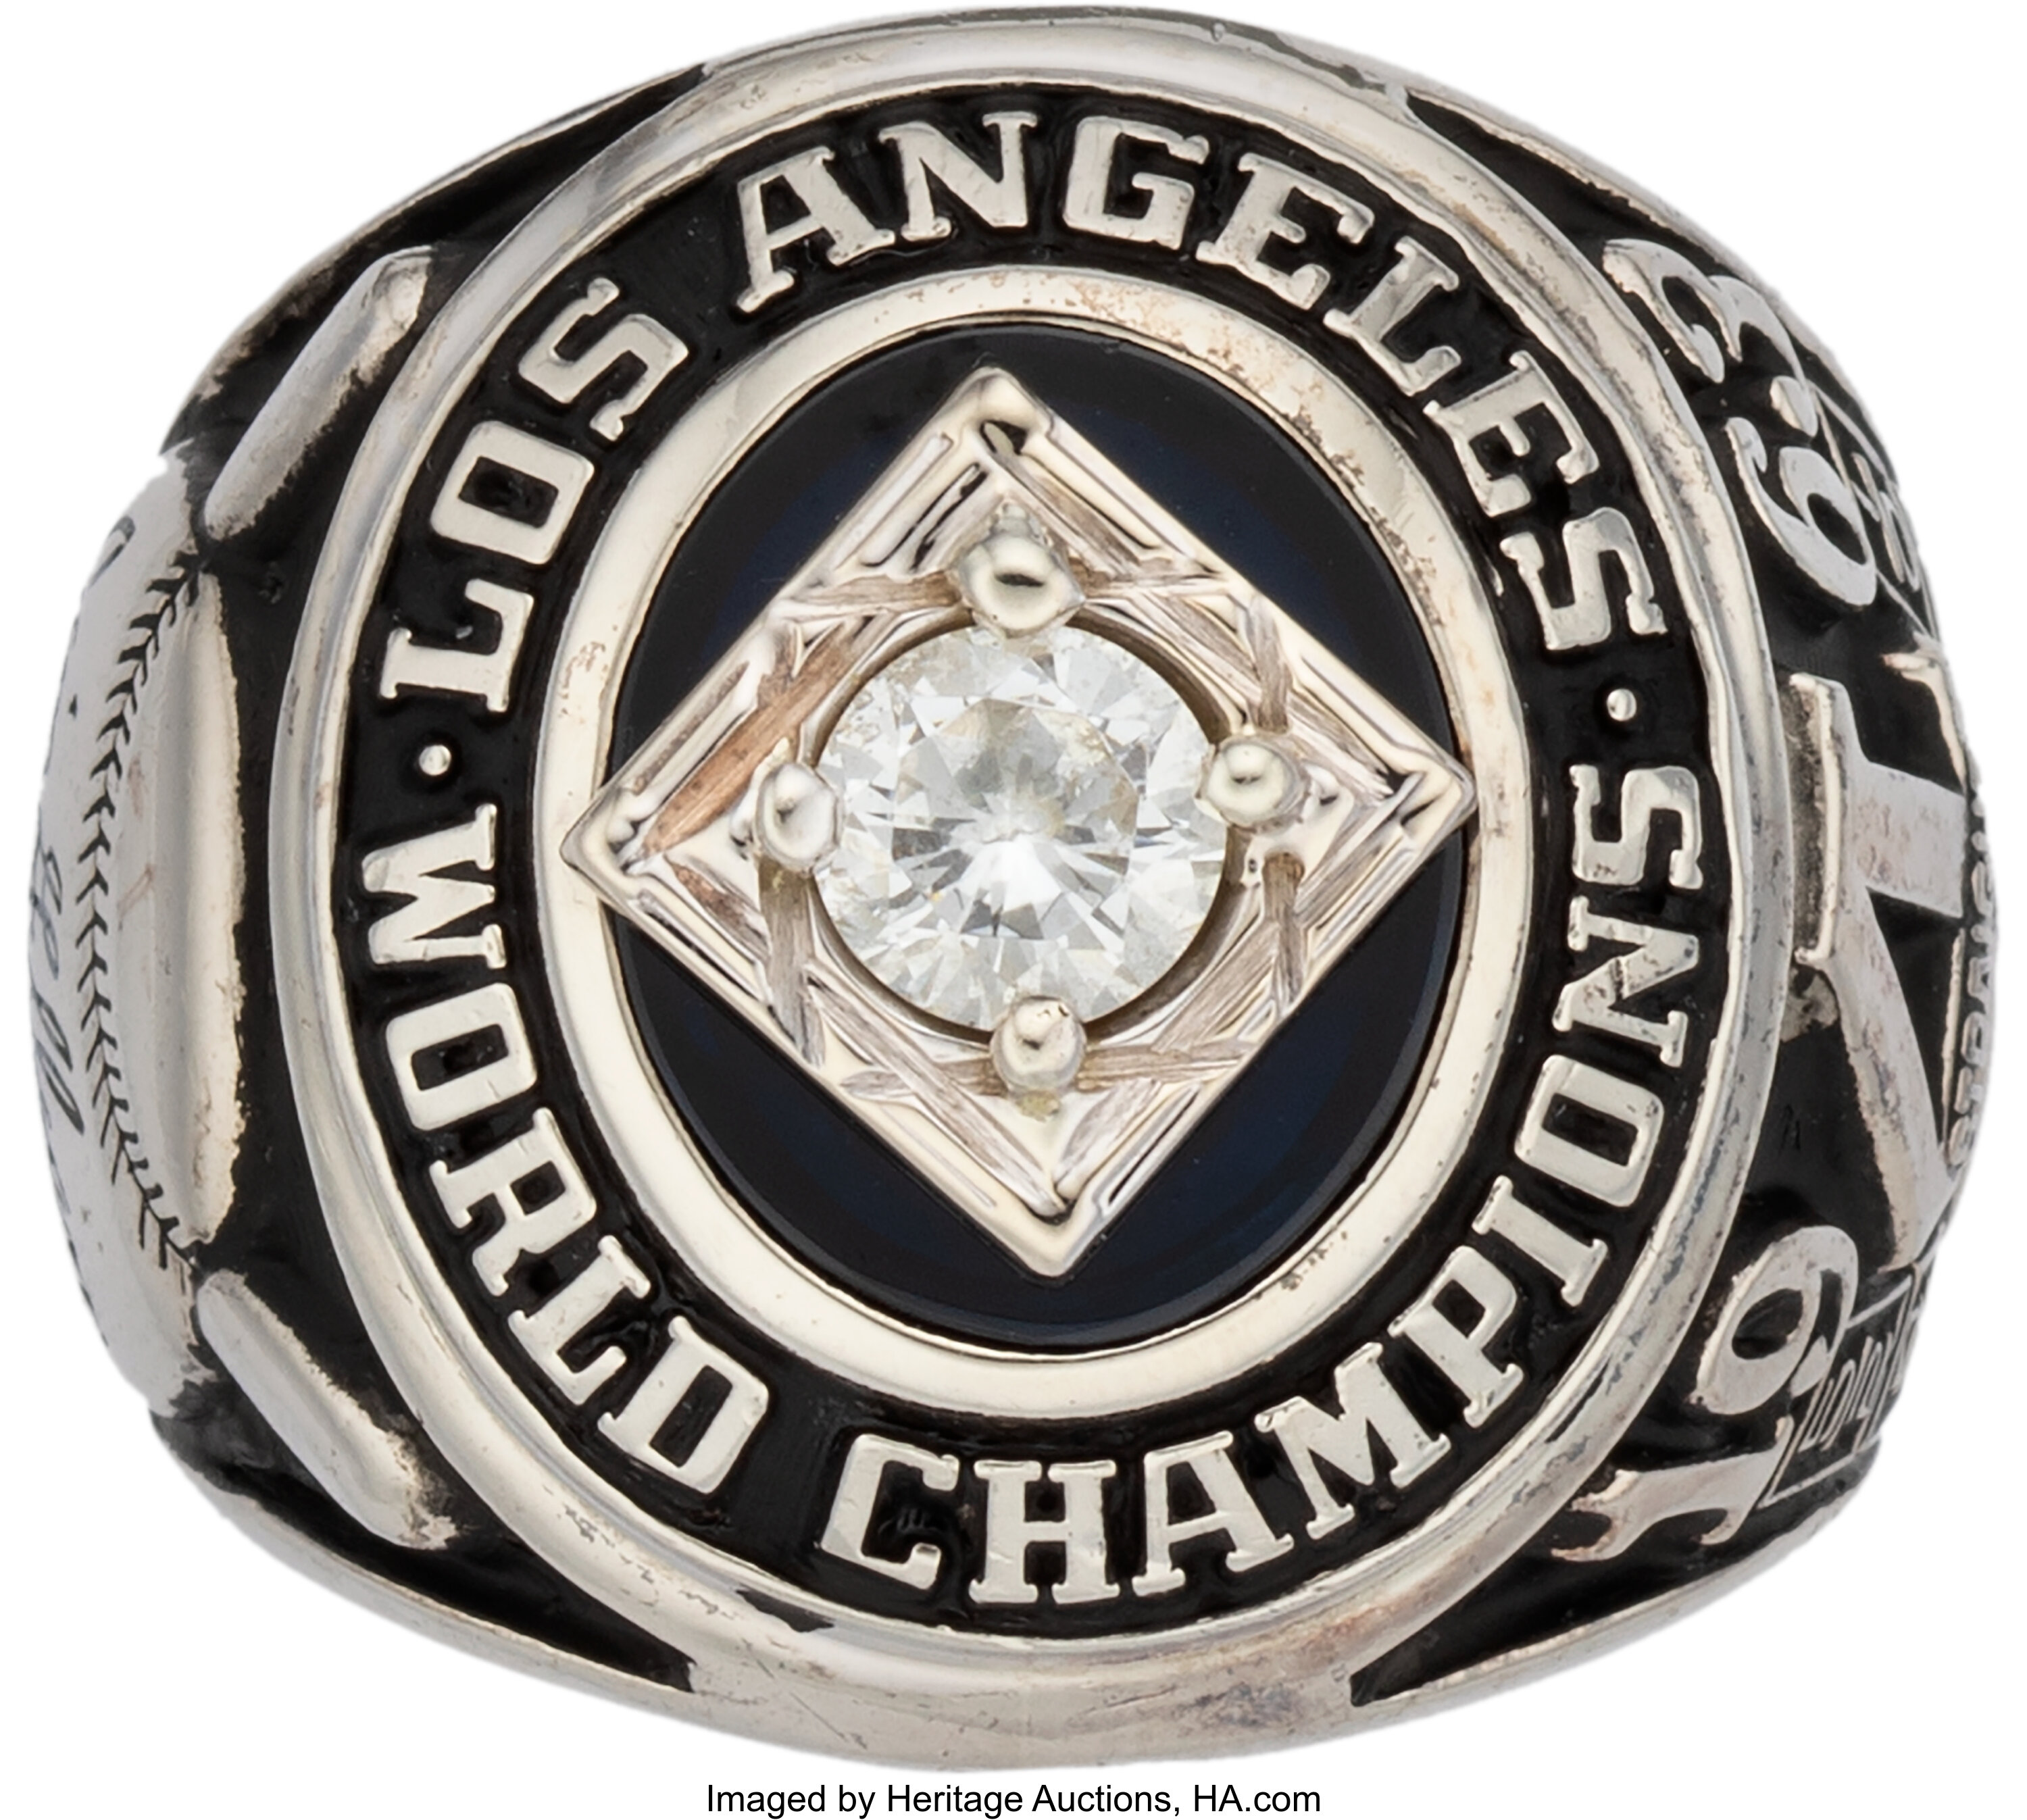  Dodgers 1955 1959 1963 1965 1981 1988 championship rings set  with box size 11 Gifts for Mens Women Kids fathers : Sports & Outdoors